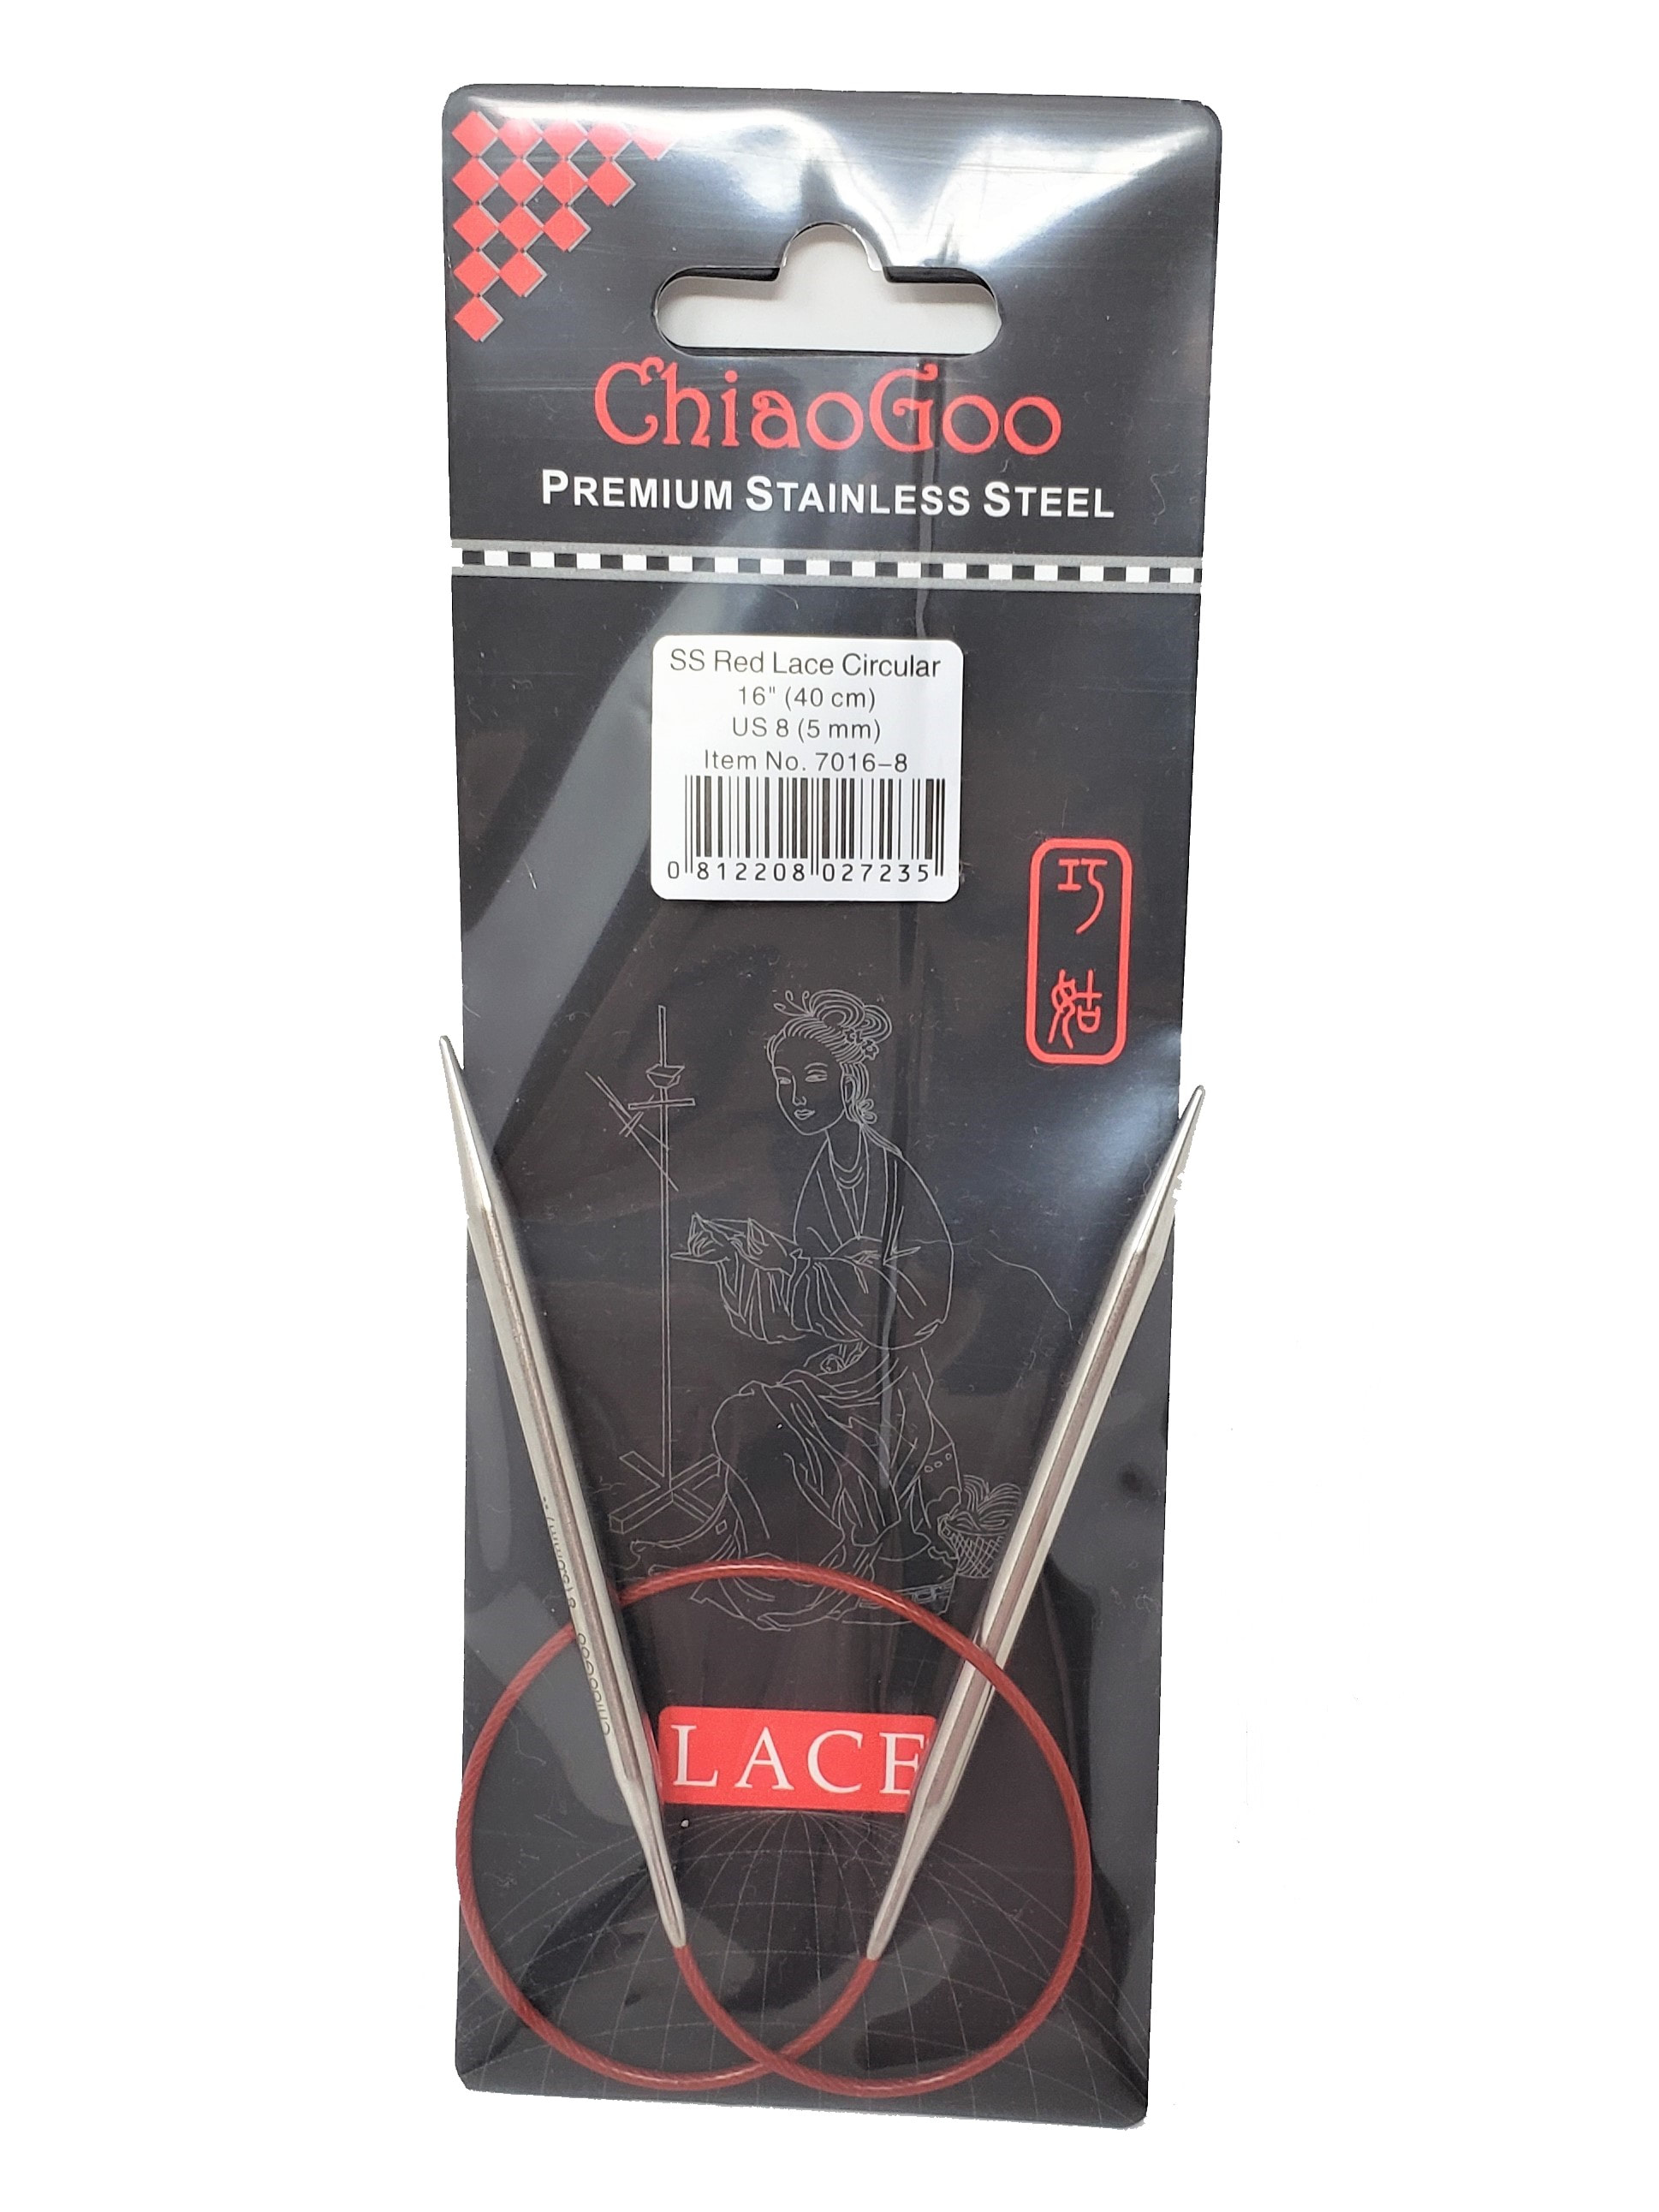 3.5 mm 40 cm ChiaoGoo :Steel Red LACE Circular Needles: 4 US 16 in